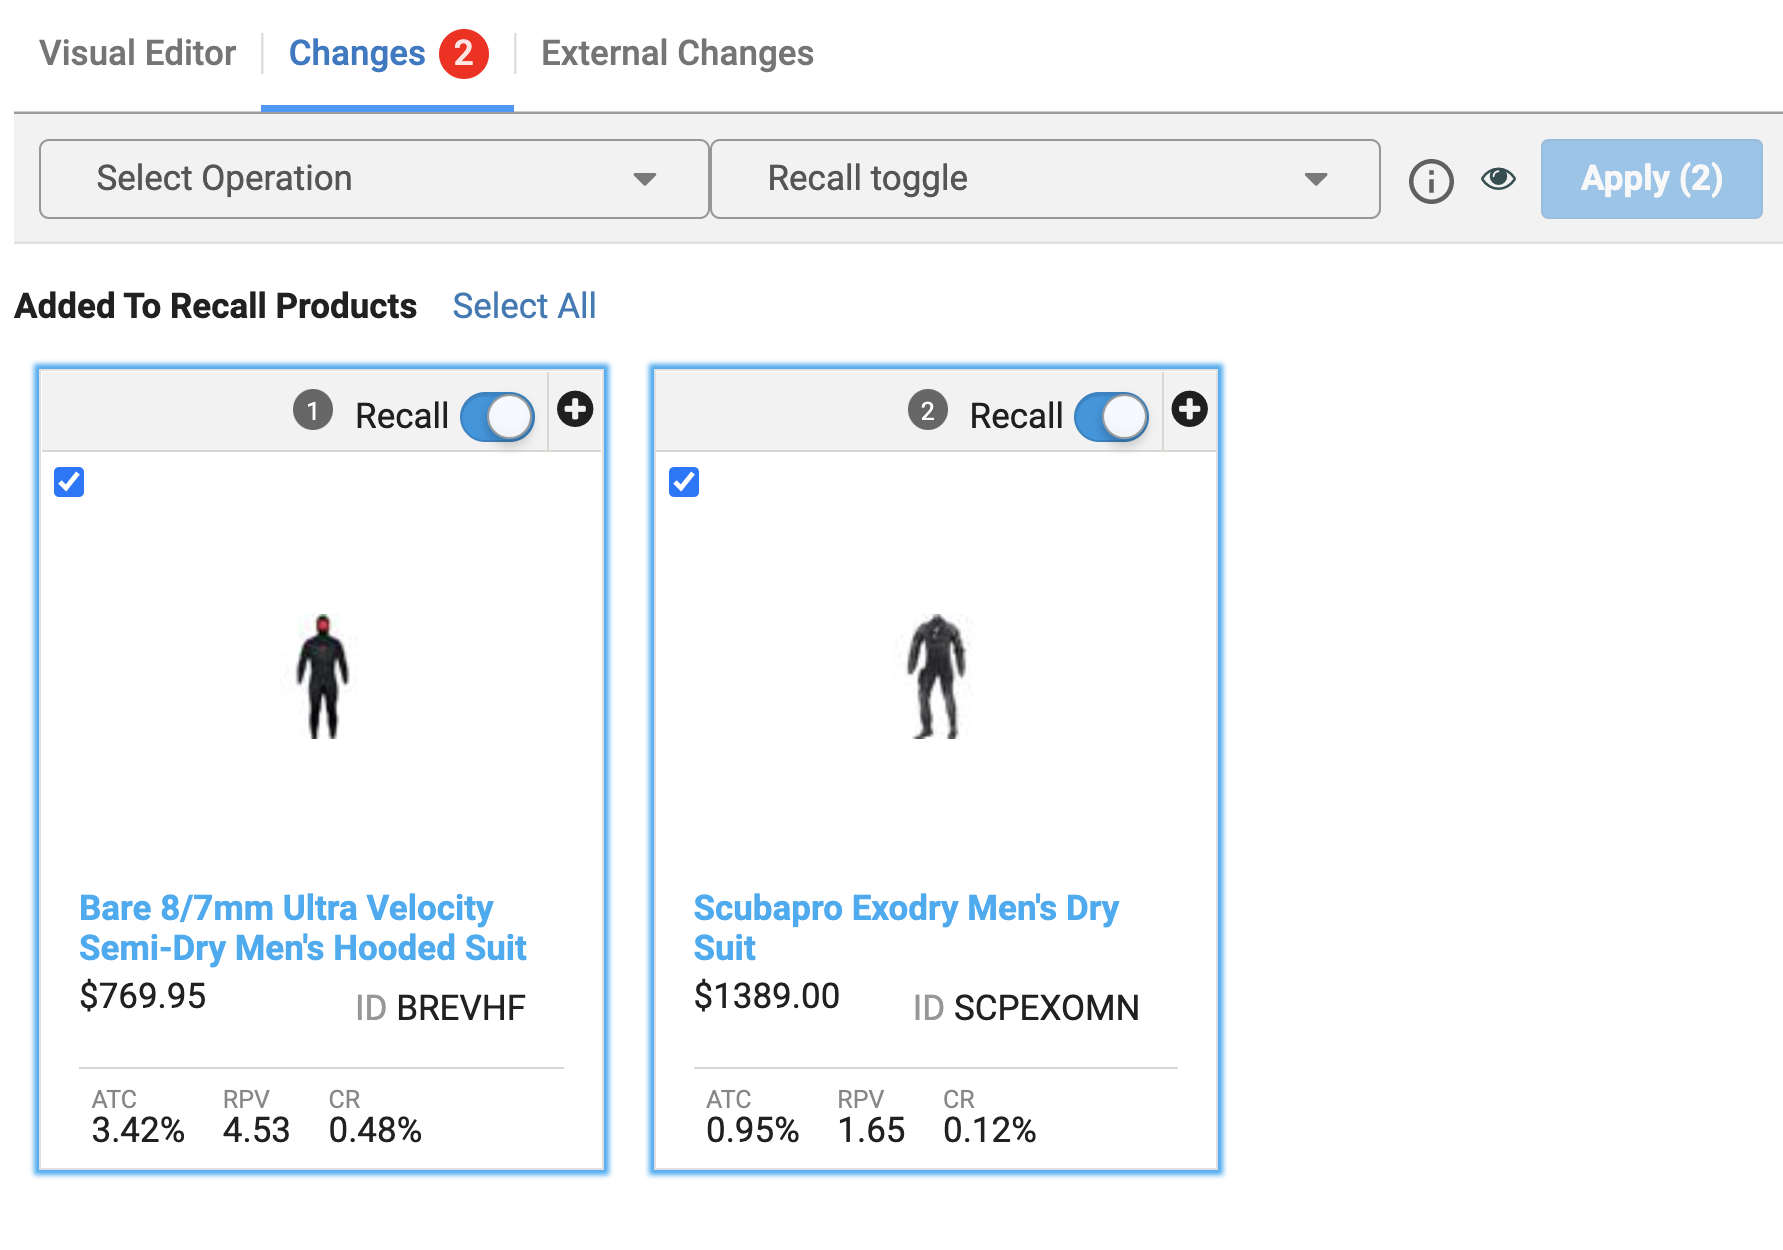 Adding products to recall in bulk using the Changes tab